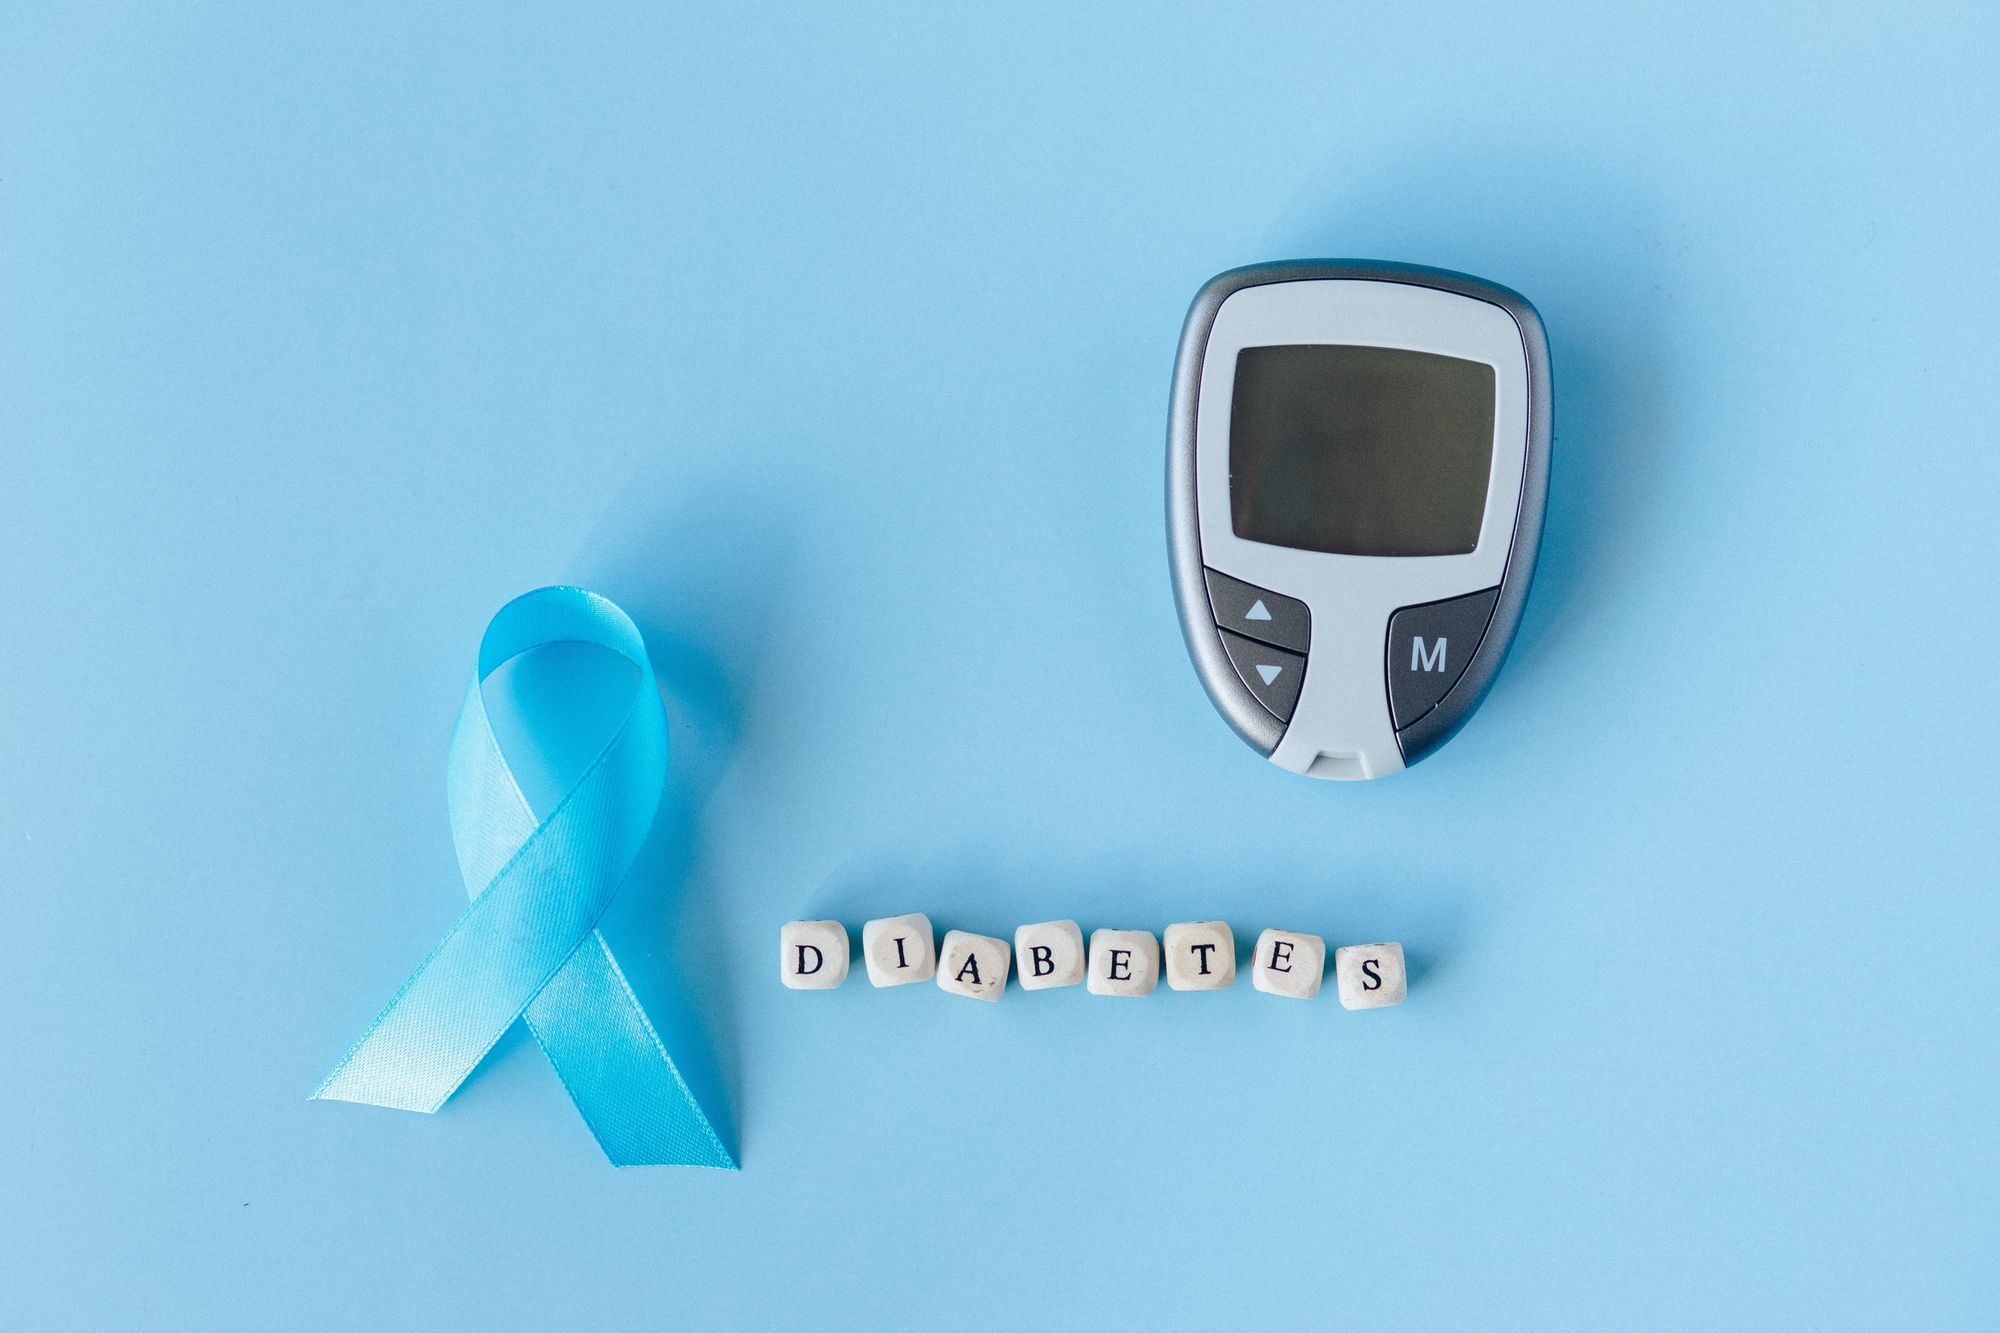 How Much Do You Know About Diabetes? Take This Quiz to Find Out!